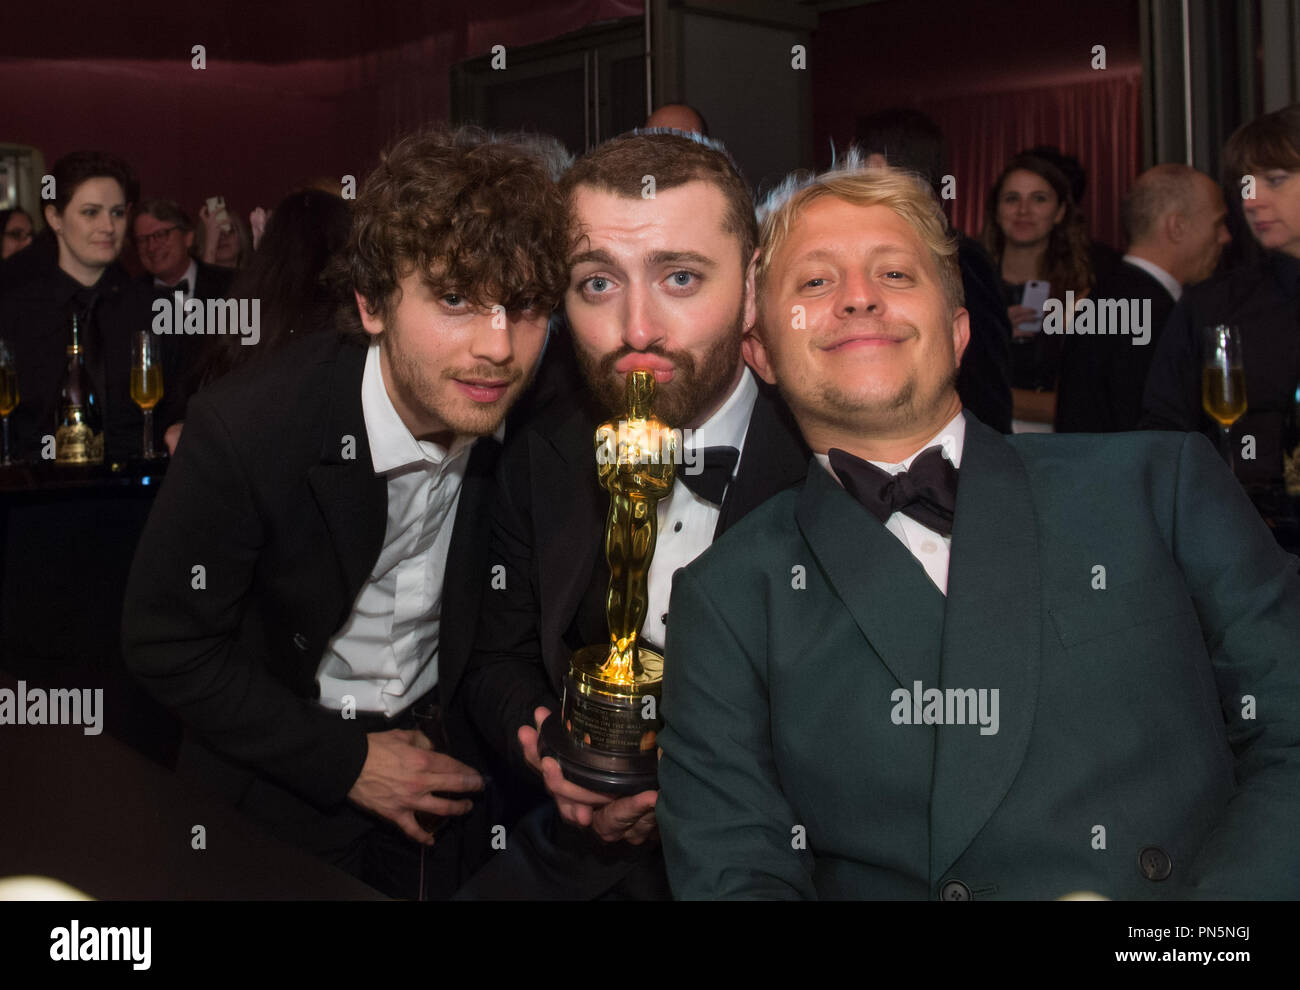 Oscar®-winner, Sam Smith, at the Governors Ball following the live ABC Telecast of The 88th Oscars® at the Dolby® Theatre in Hollywood, CA on Sunday, February 28, 2016.  File Reference # 32854 844THA  For Editorial Use Only -  All Rights Reserved Stock Photo